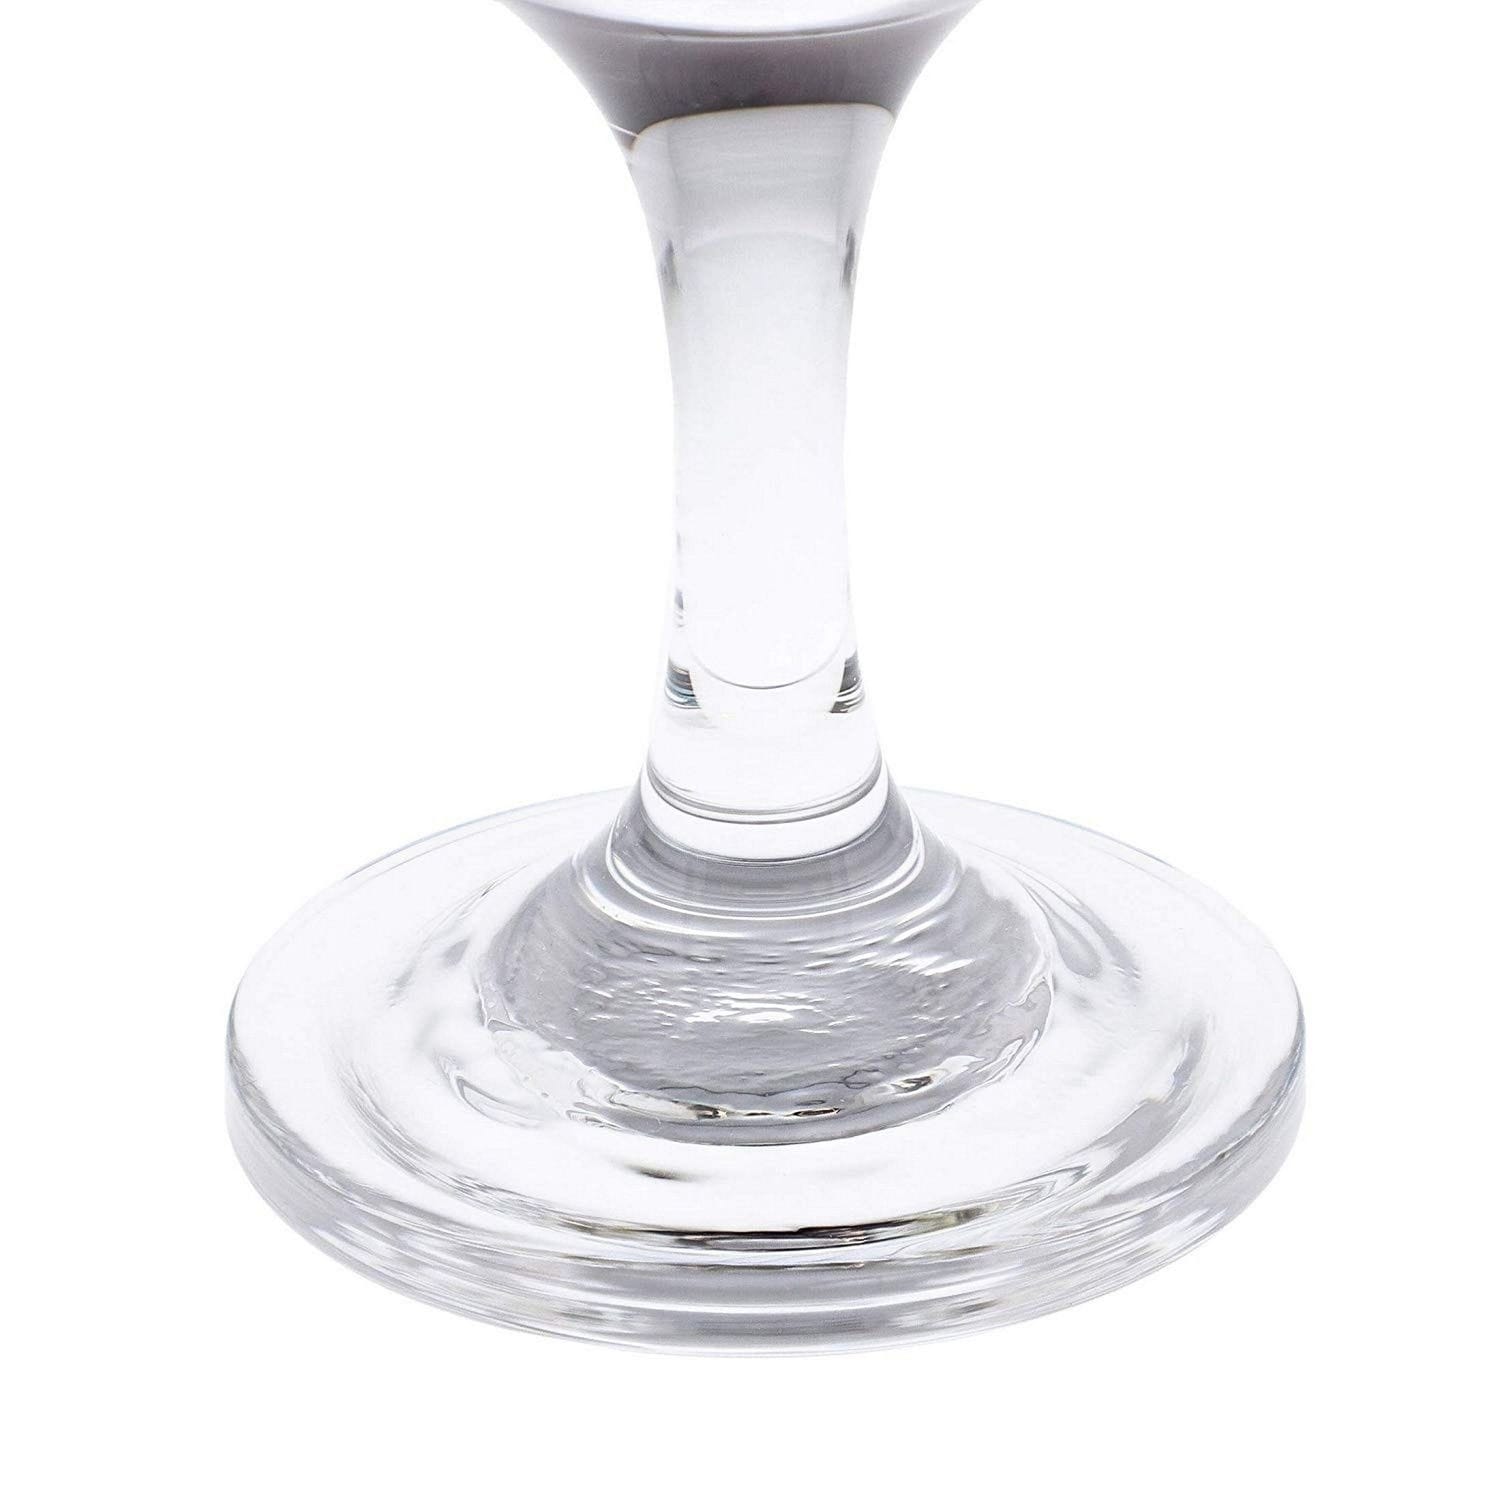 https://ak1.ostkcdn.com/images/products/30100835/Juvale-Set-of-4-Small-Clear-Glass-Stemmed-Wine-Glasses-4.5-Ounces-ab9f549e-c116-496b-9a29-4f0a06c39ade.jpg